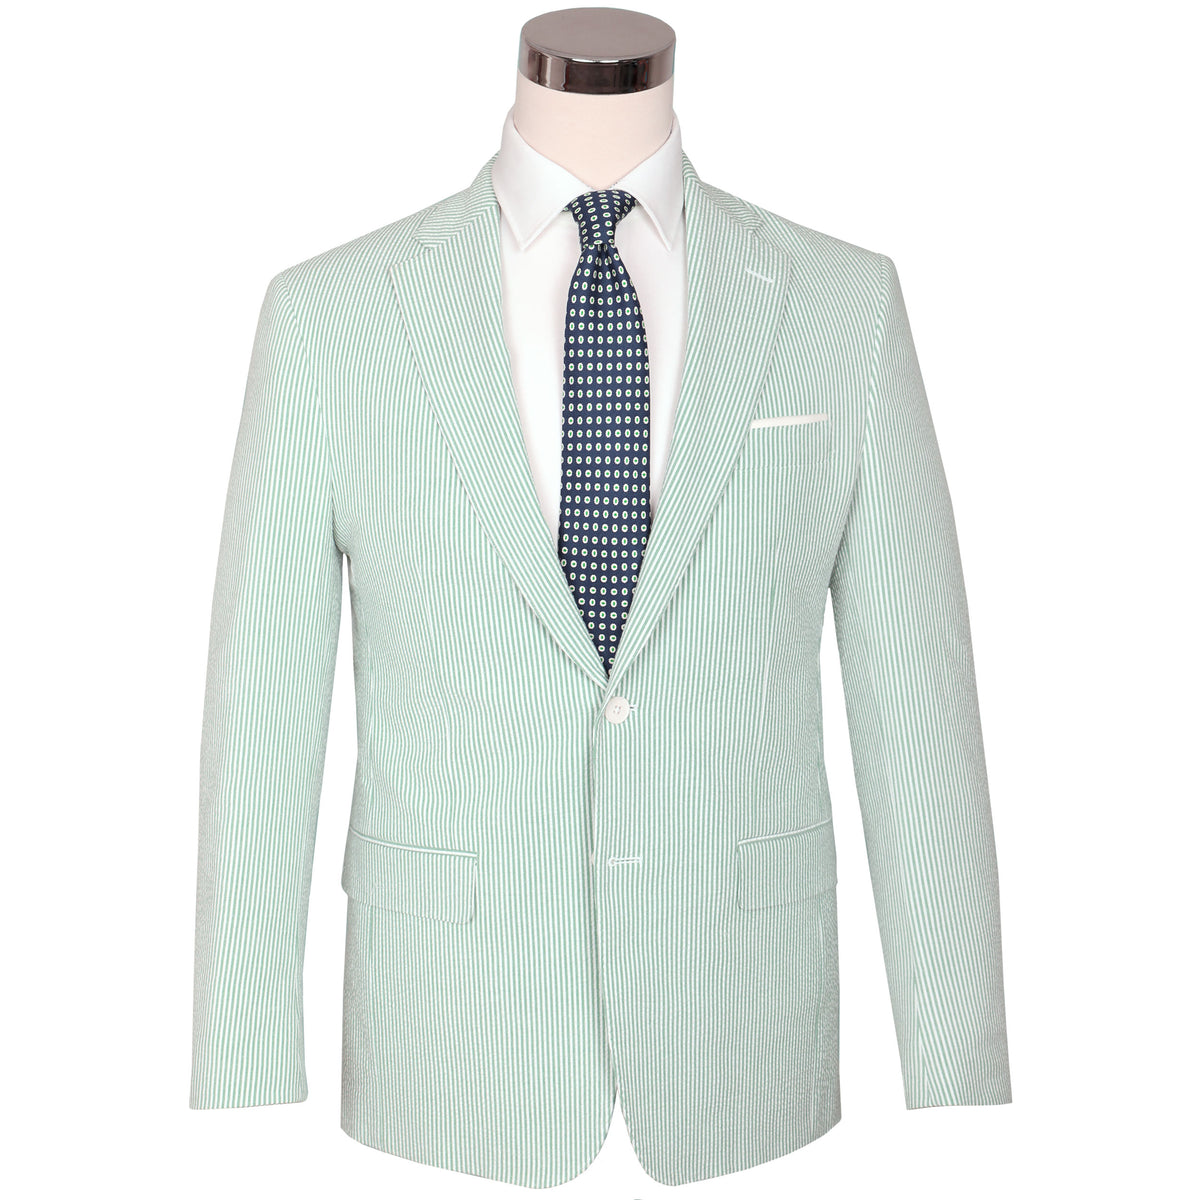 The chill of a pewter cup, the finish of a fine Kentucky bourbon, &amp; the crunch of that good ice - get that Derby Day feeling in our refreshingly minty stretch seersucker.   97% Cotton / 3% Lycra Haspel Exclusive Seersucker Stretch Fabric • Maximized Seersucker Pucker • Audubon Classic Fit • Natural Shoulder • Two Buttons • Flap Pockets • 3/4 Lined for Maximum Cool • Side Vents • Notch Lapel • Dry Clean • Made in USA